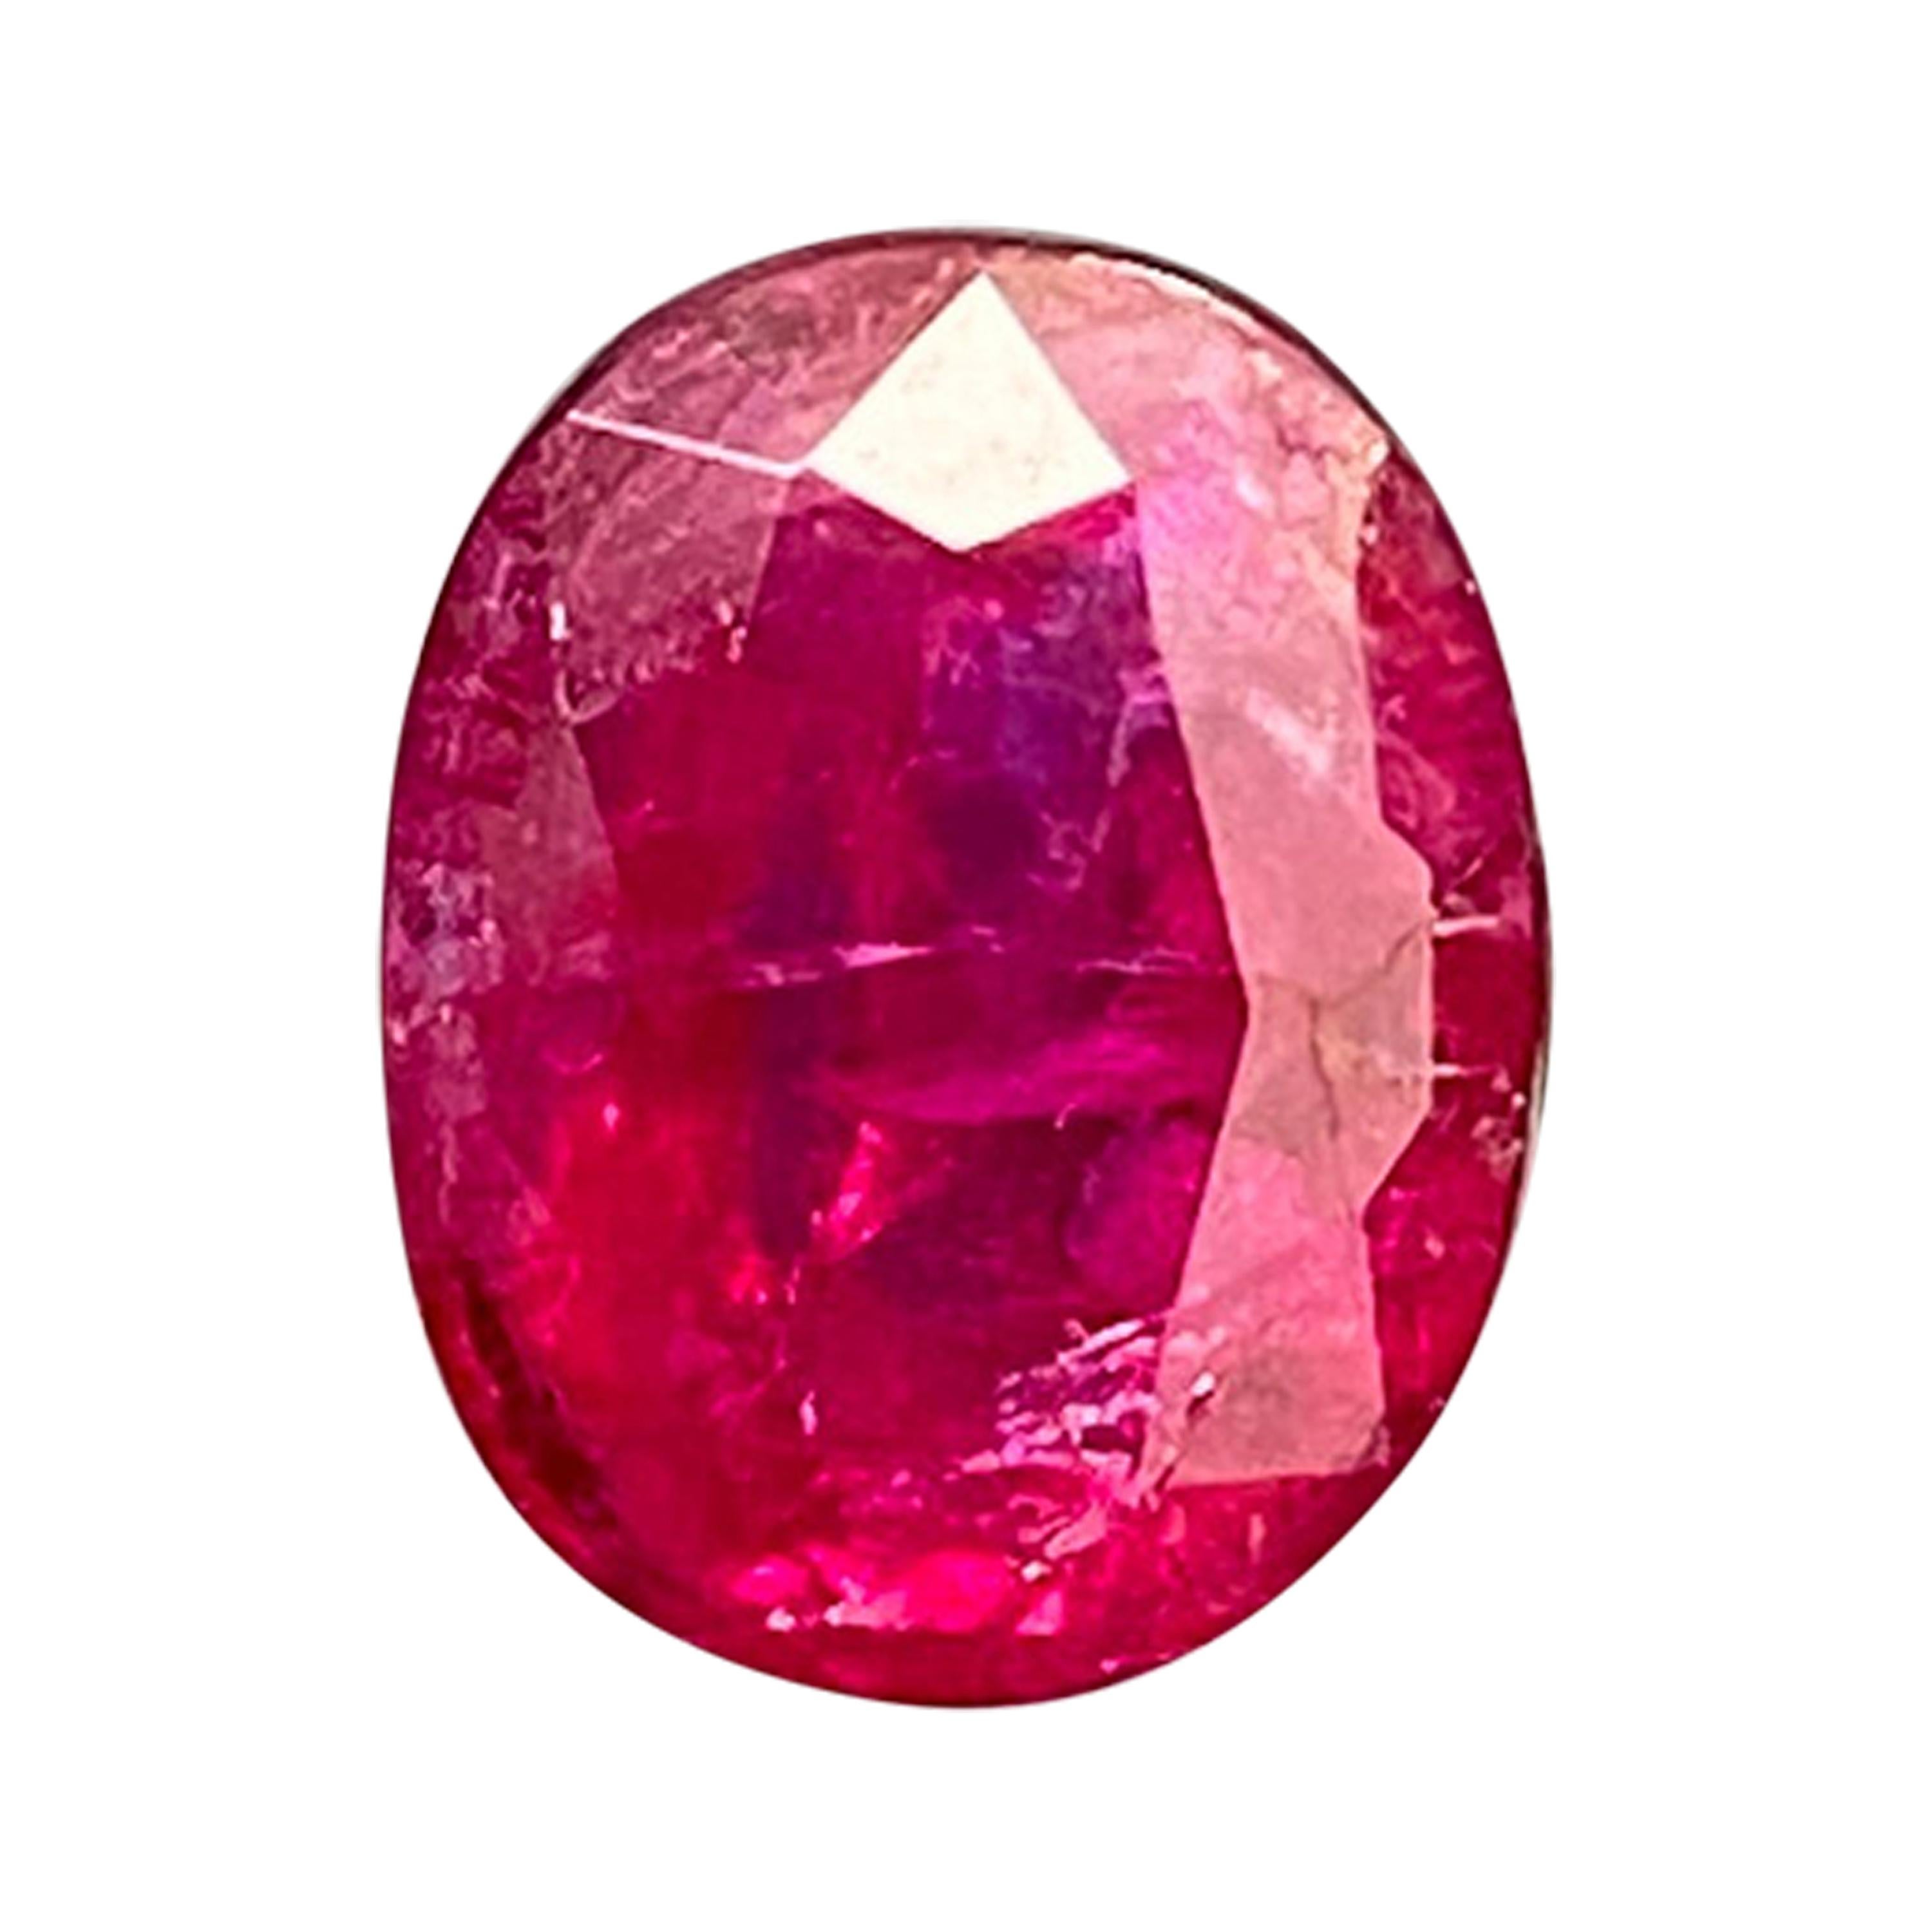 1.90 Carat GIA Certified Oval-Cut Unheated Burmese Ruby:

A rare gem, it is a 1.90 carat unheated oval-cut Burmese ruby. Hailing from the historic Mogok mines in Burma as certified by GIA Lab, the ruby possesses an intense red colour saturation,